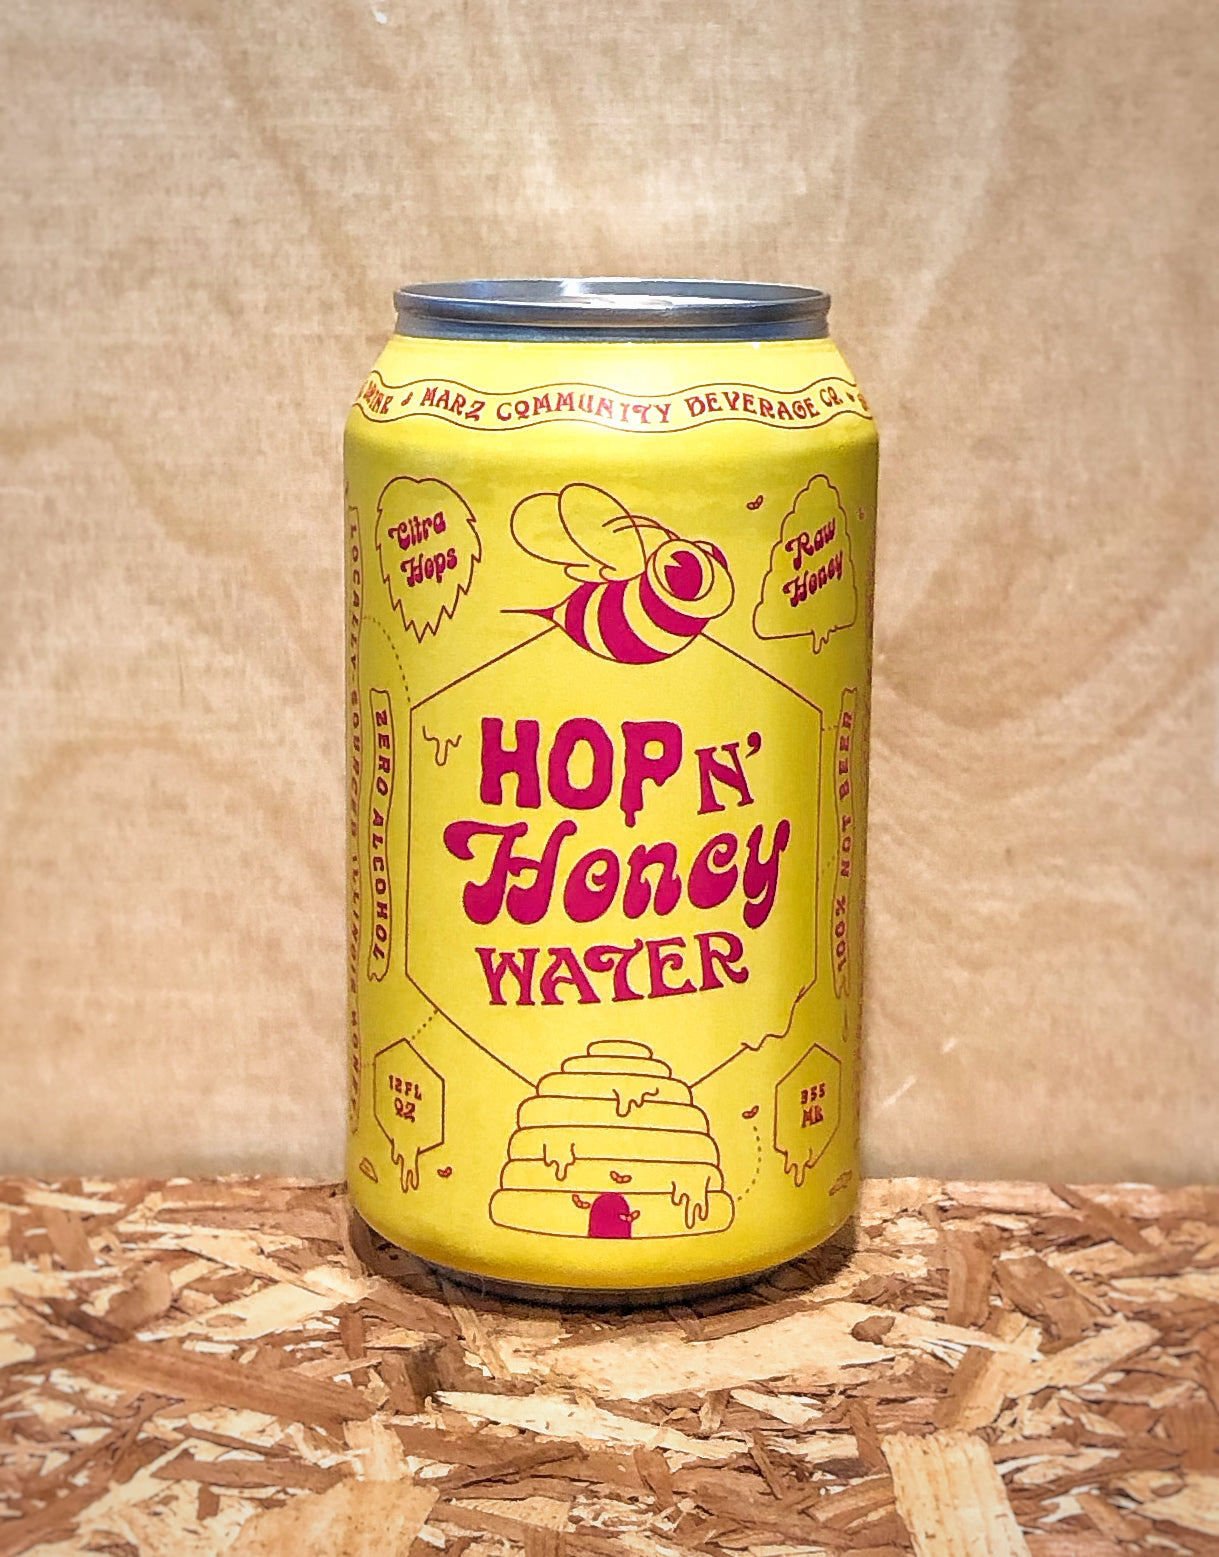 Marz Community Brewing 'Hop n' Honey Water' Sparkling Non-Alcoholic Drink (Chicago, IL)